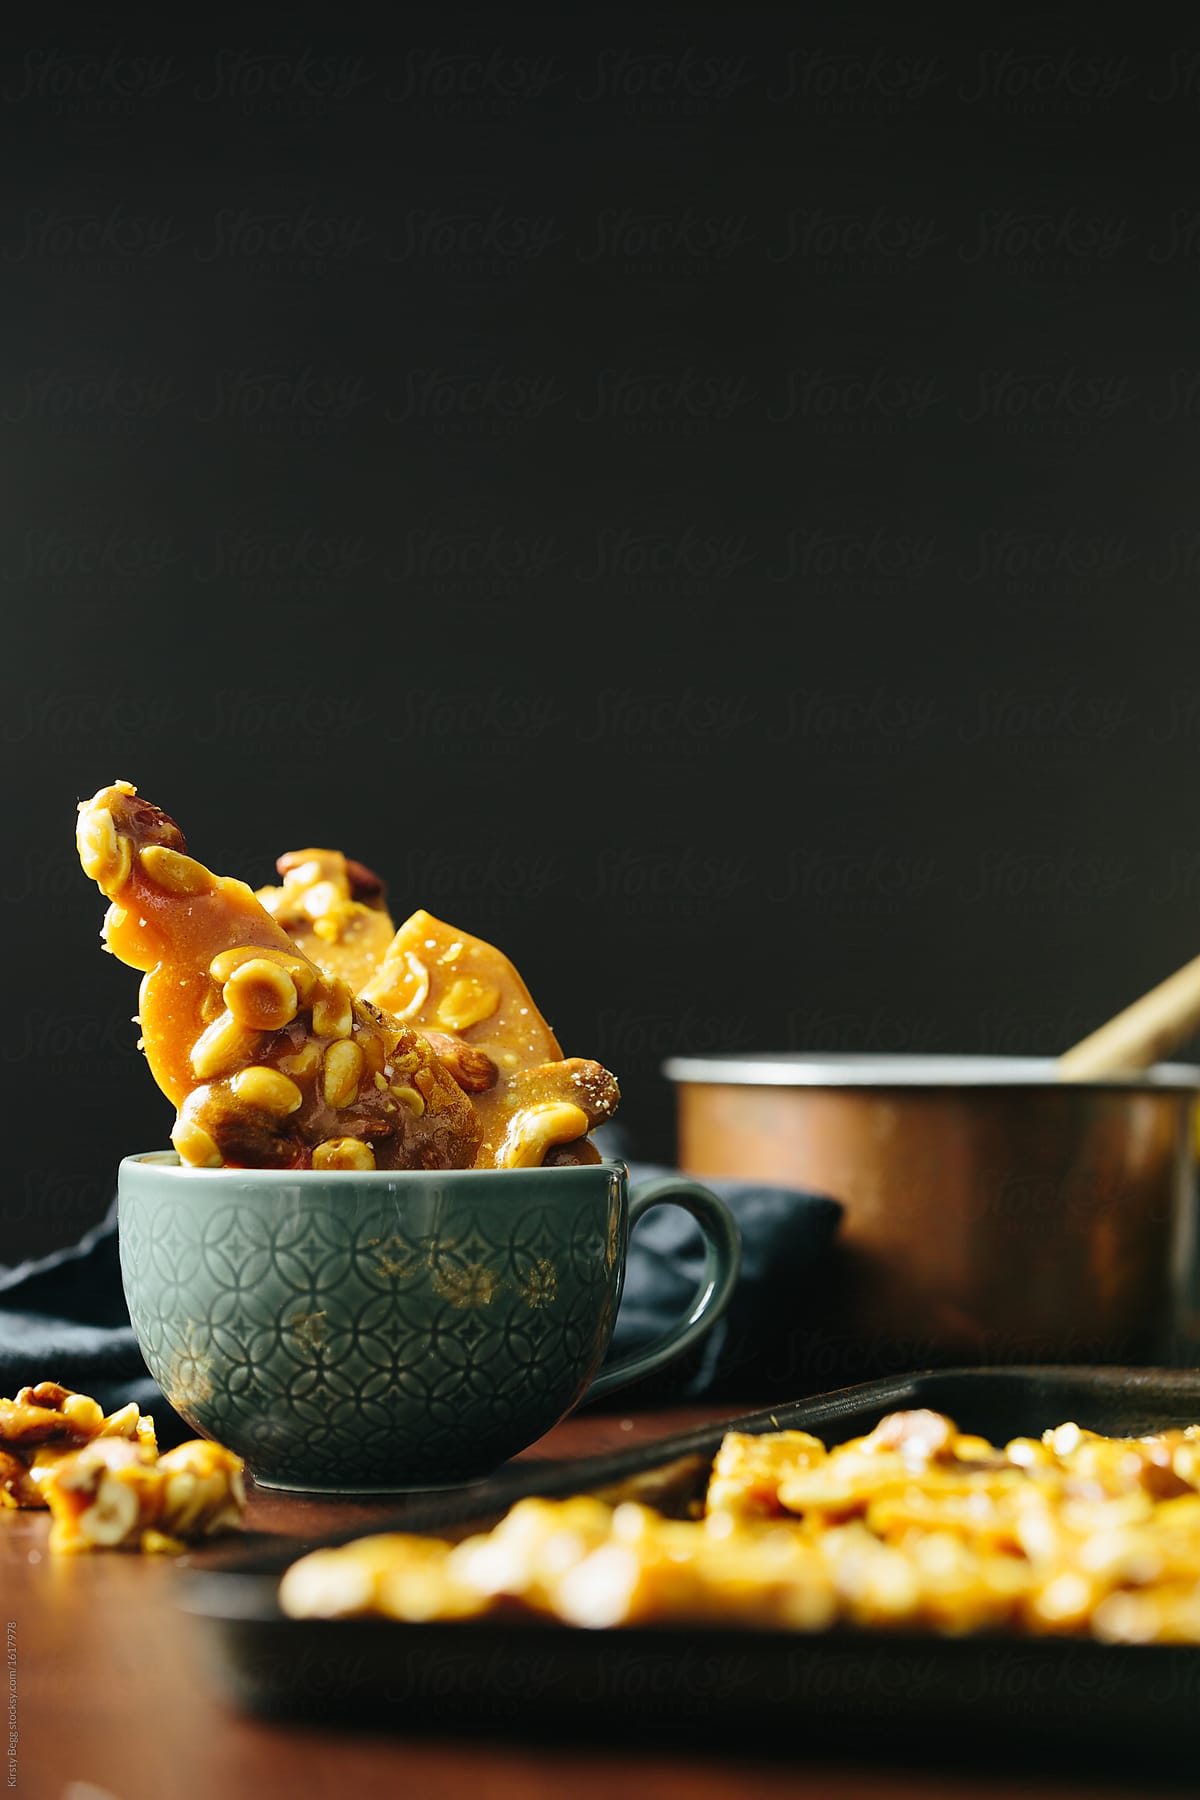 Salted caramel nut brittle shards in cup